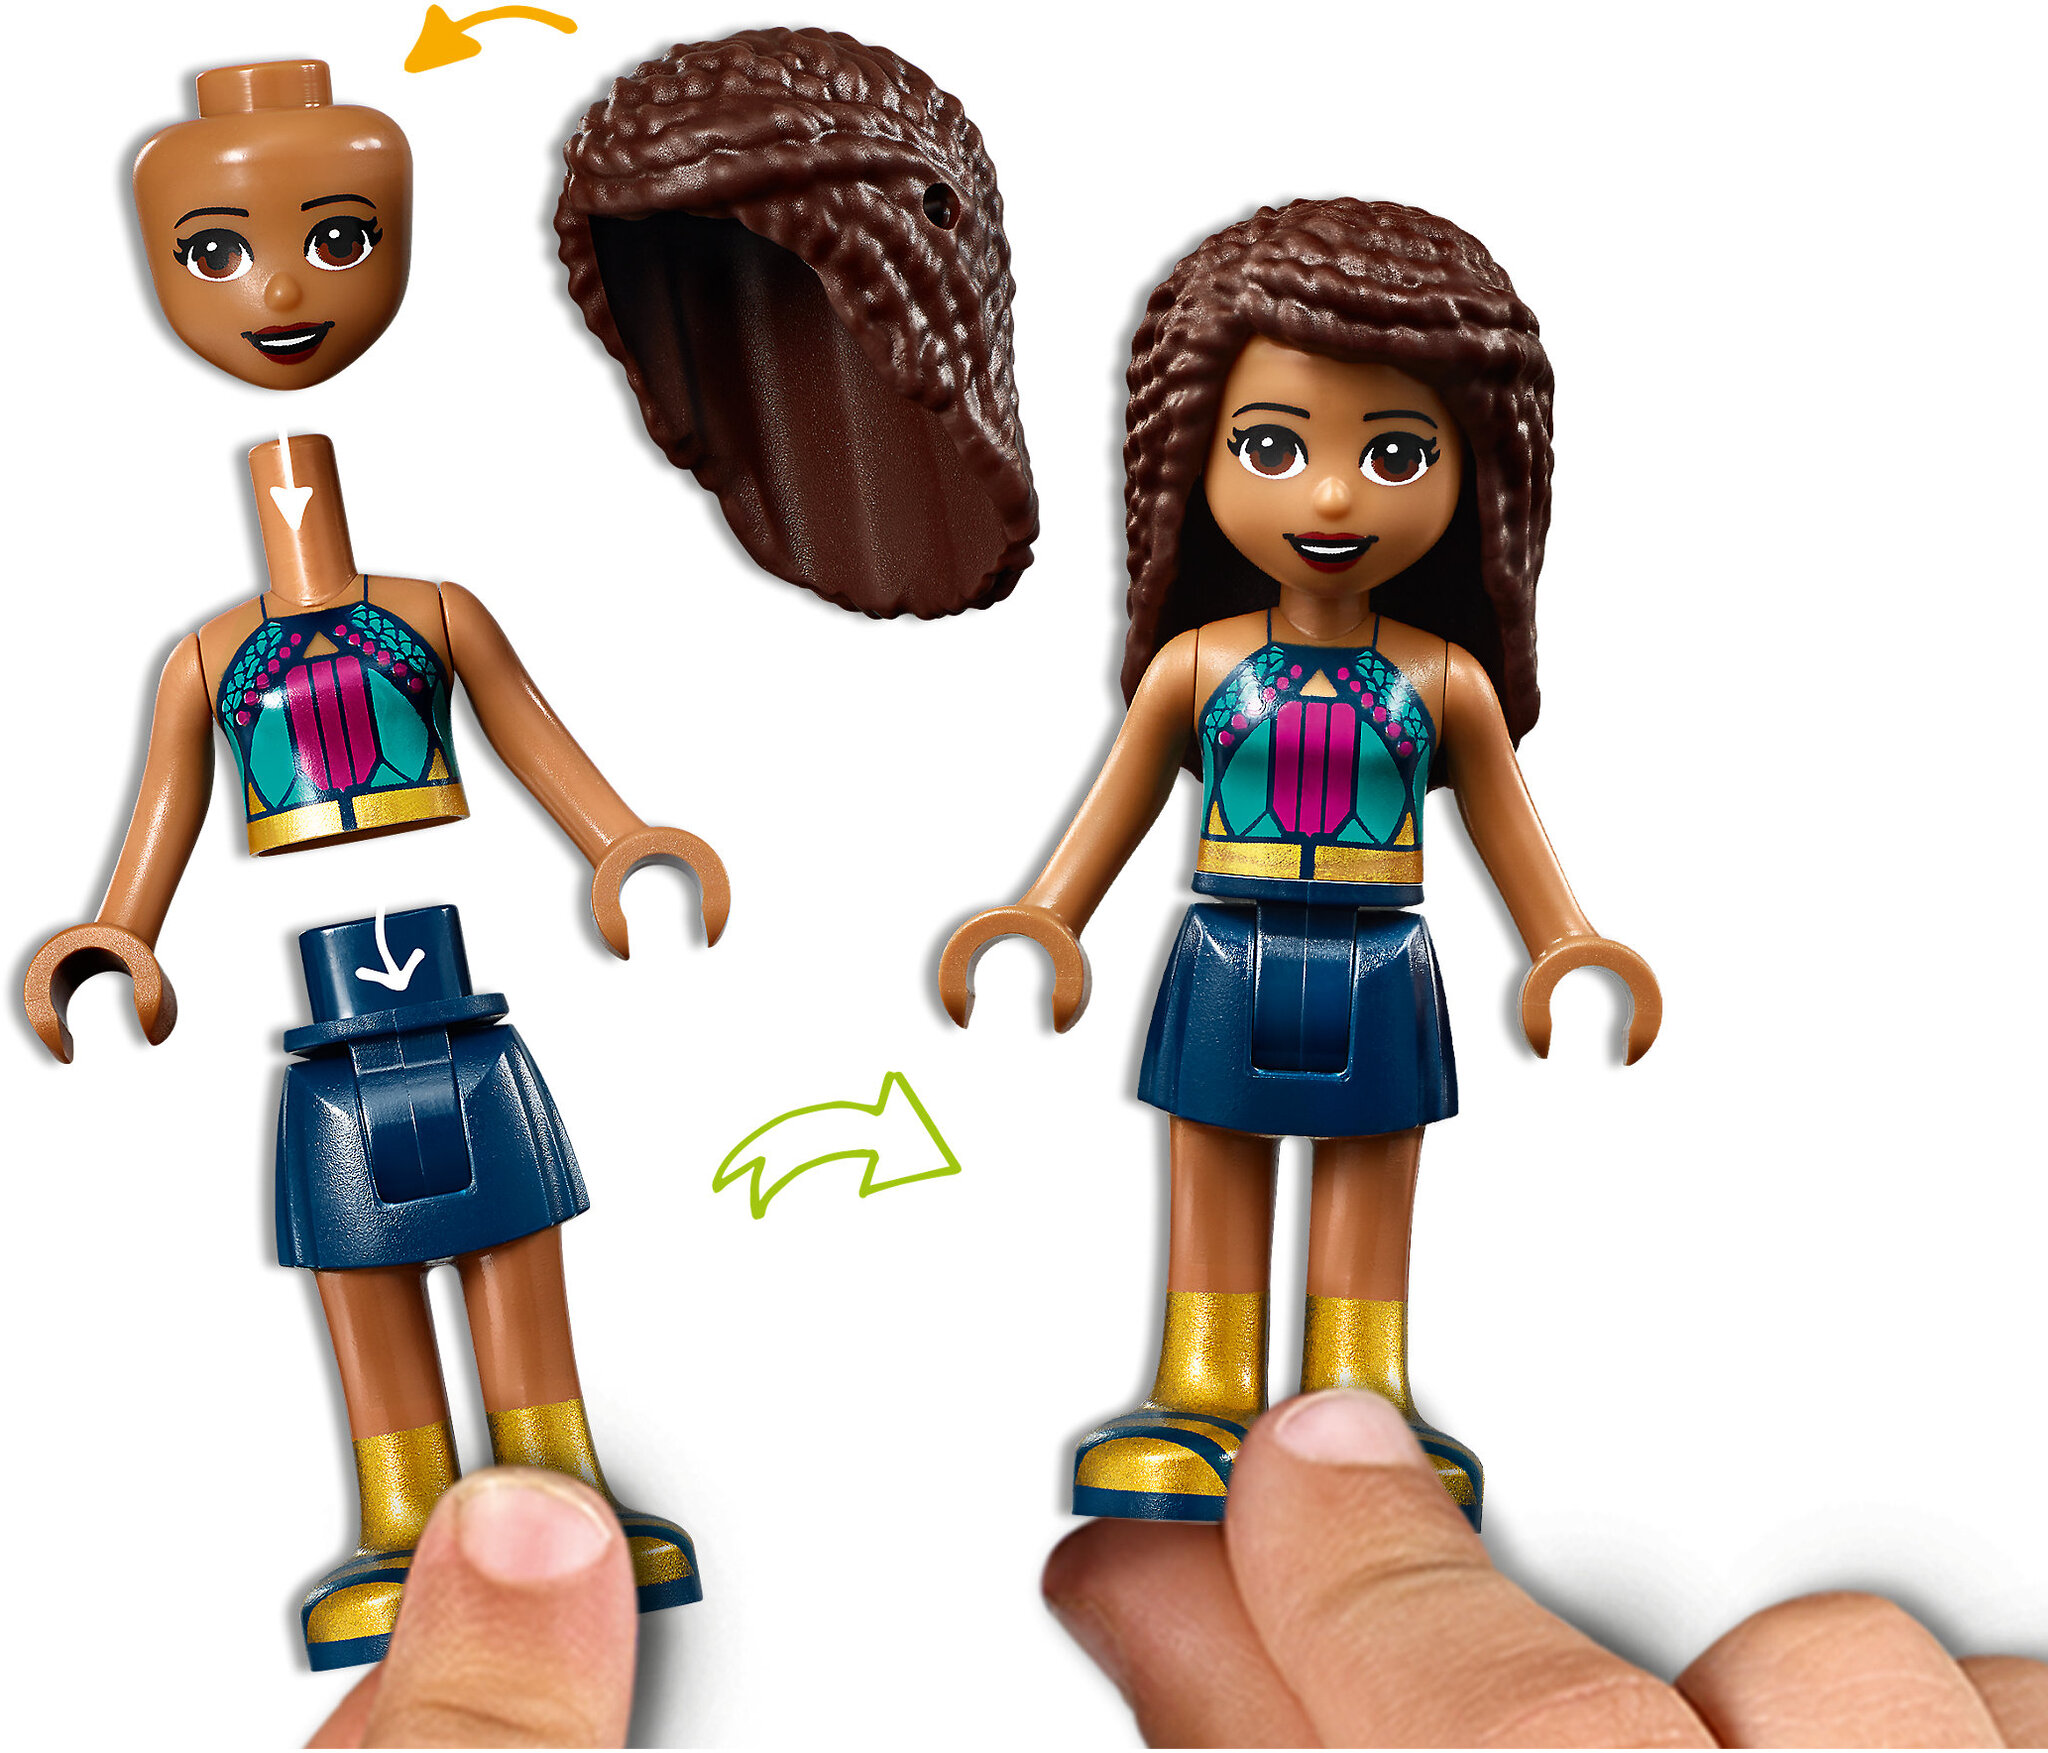 Lego friends 41390 love will find you